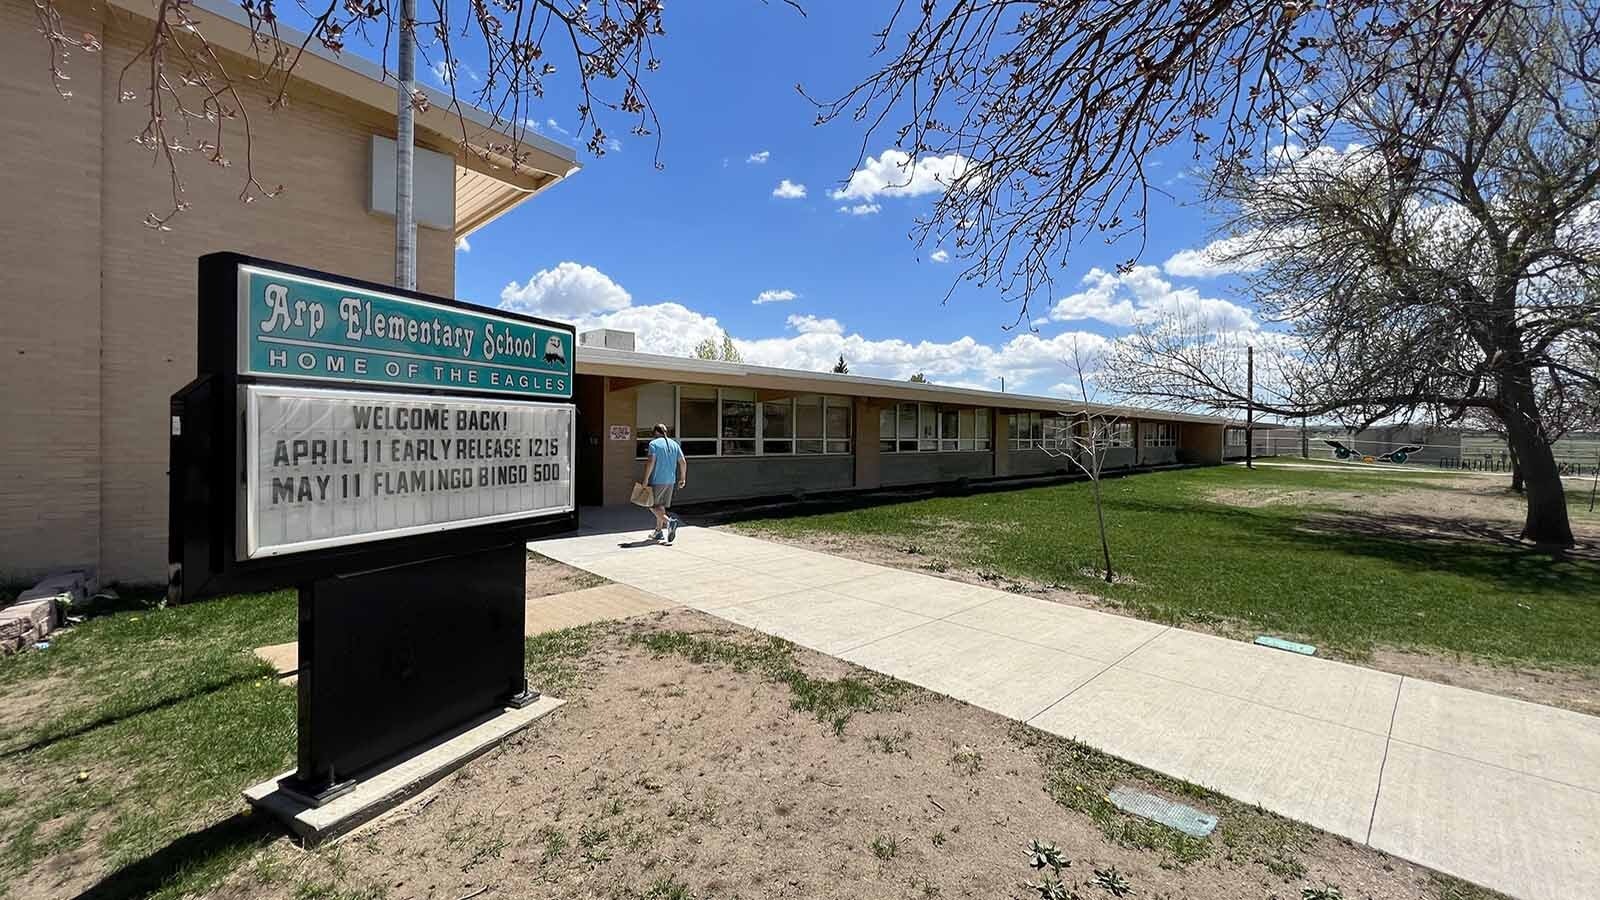 Arp Elementary School may be holding its last classes as it prepares to move into a vacant building next year pending a resolution to either upgrading or replacing its crumbling building.